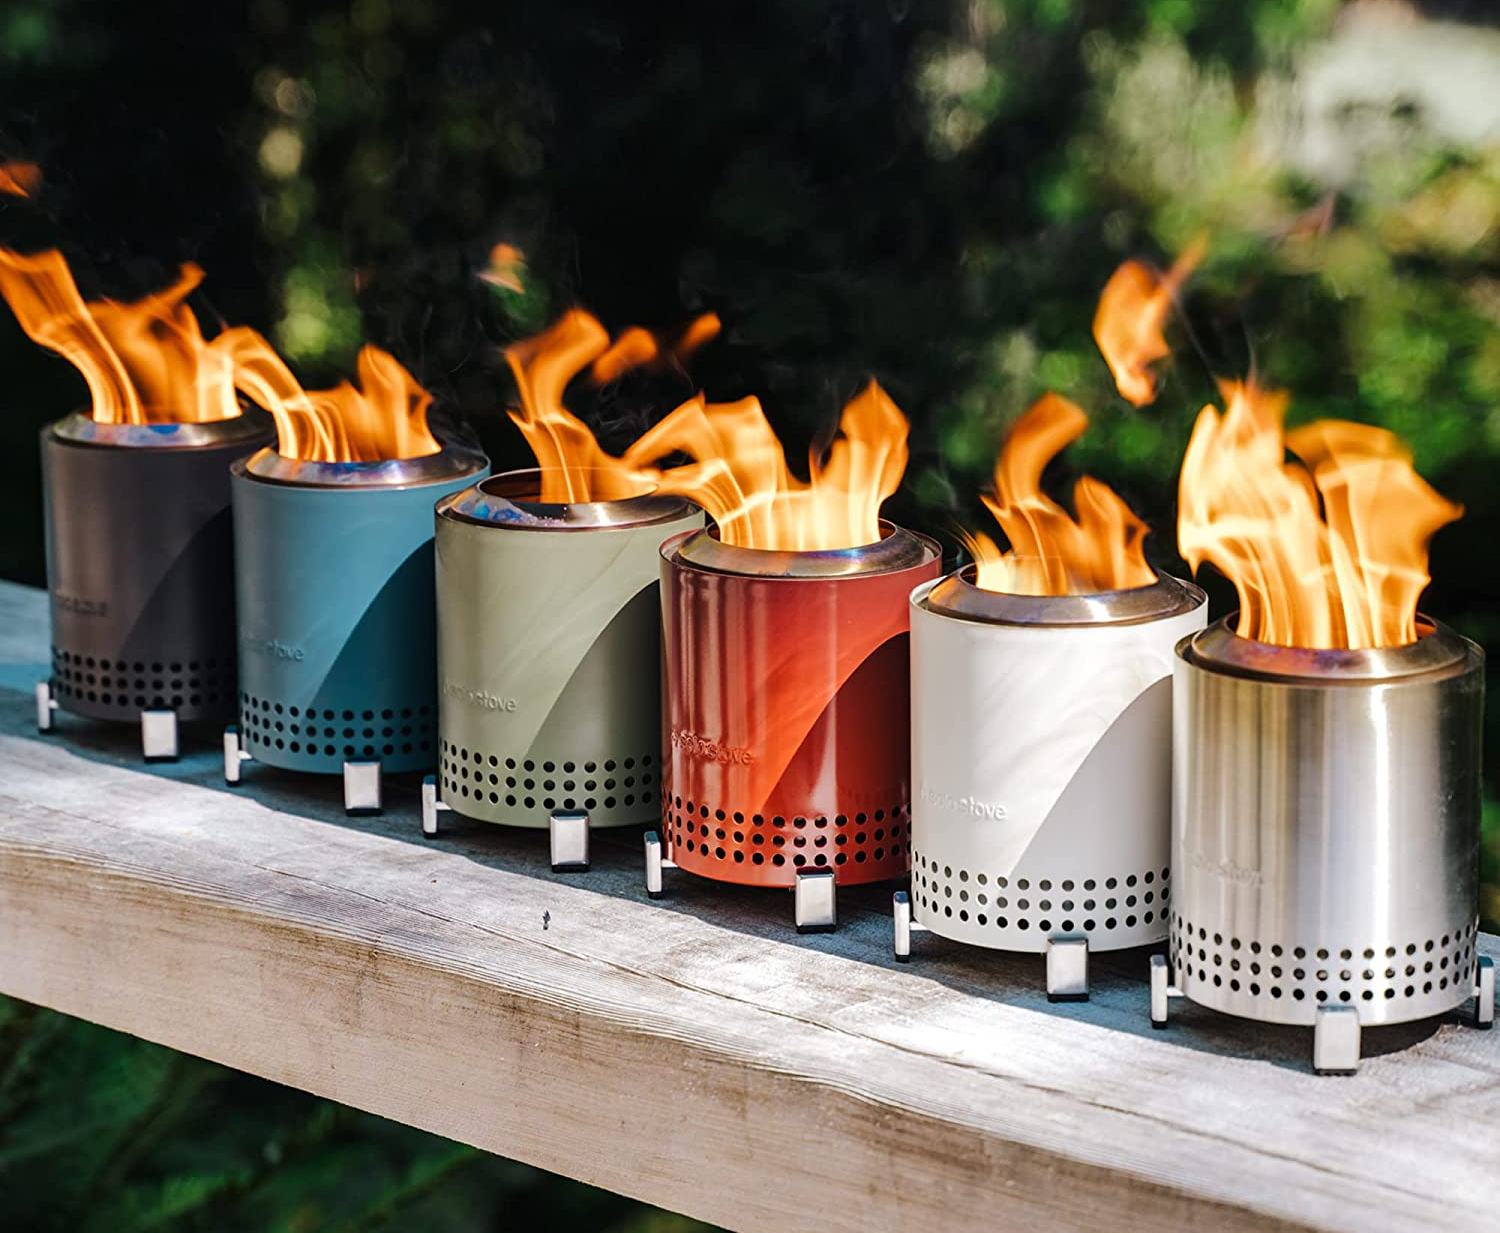 tiny metal stoves in six colors